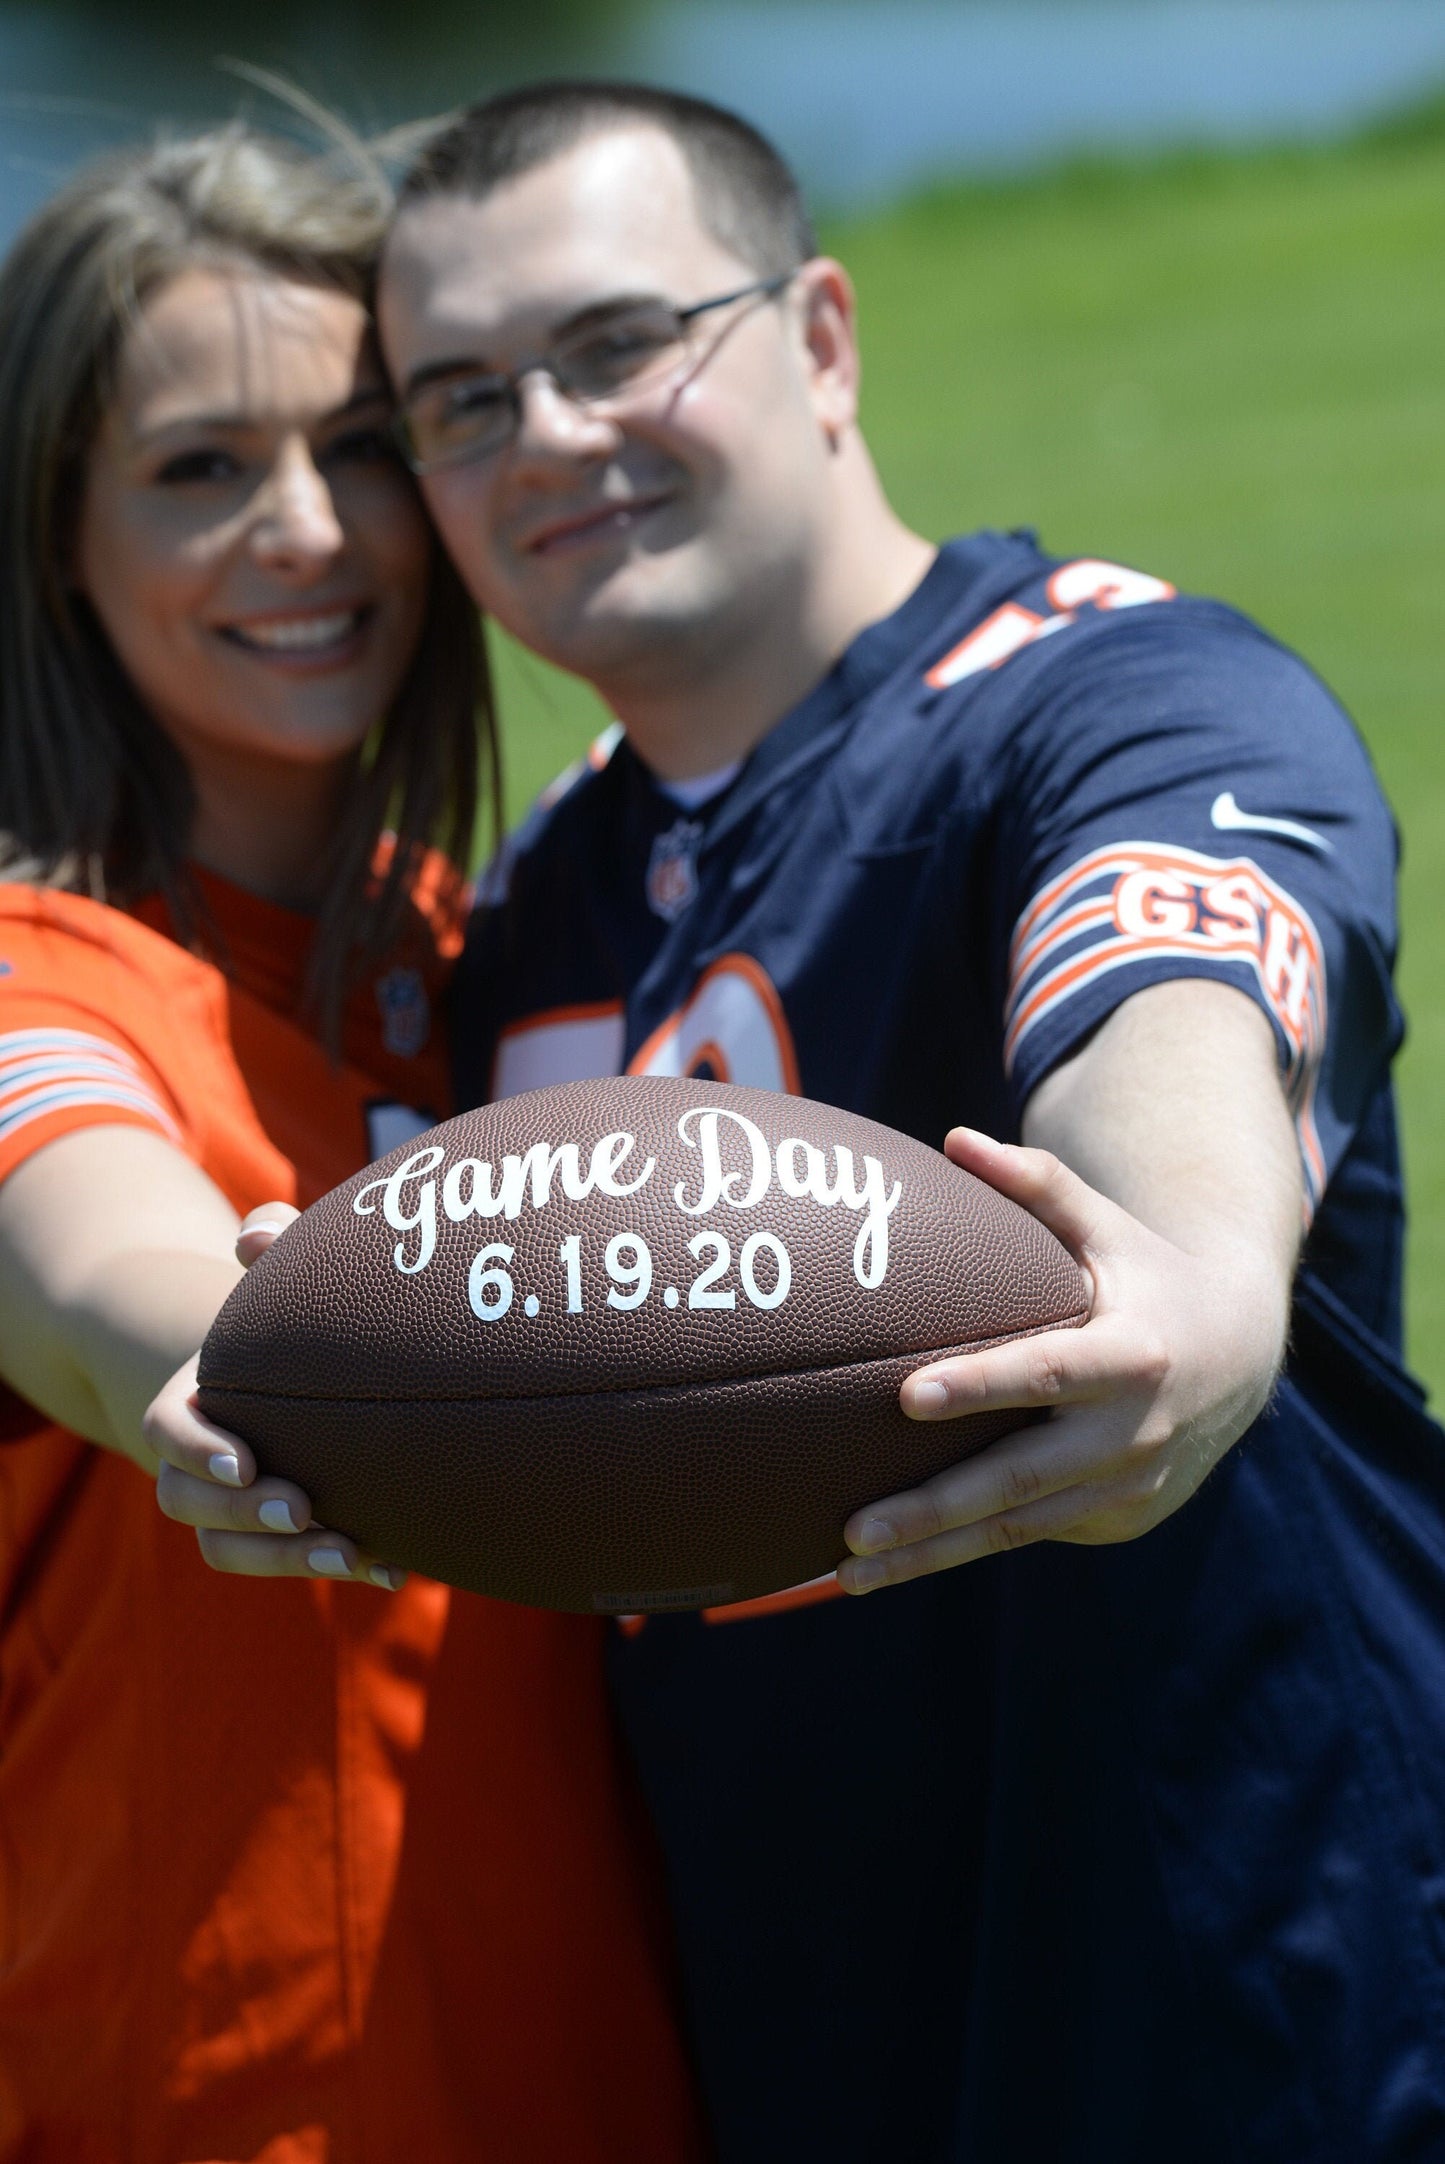 Engagement Gift, Engagement Gift for Couple,  Engagement Announcement, Save the Date Football, Wedding Football, Sports Wedding, Sports Gift